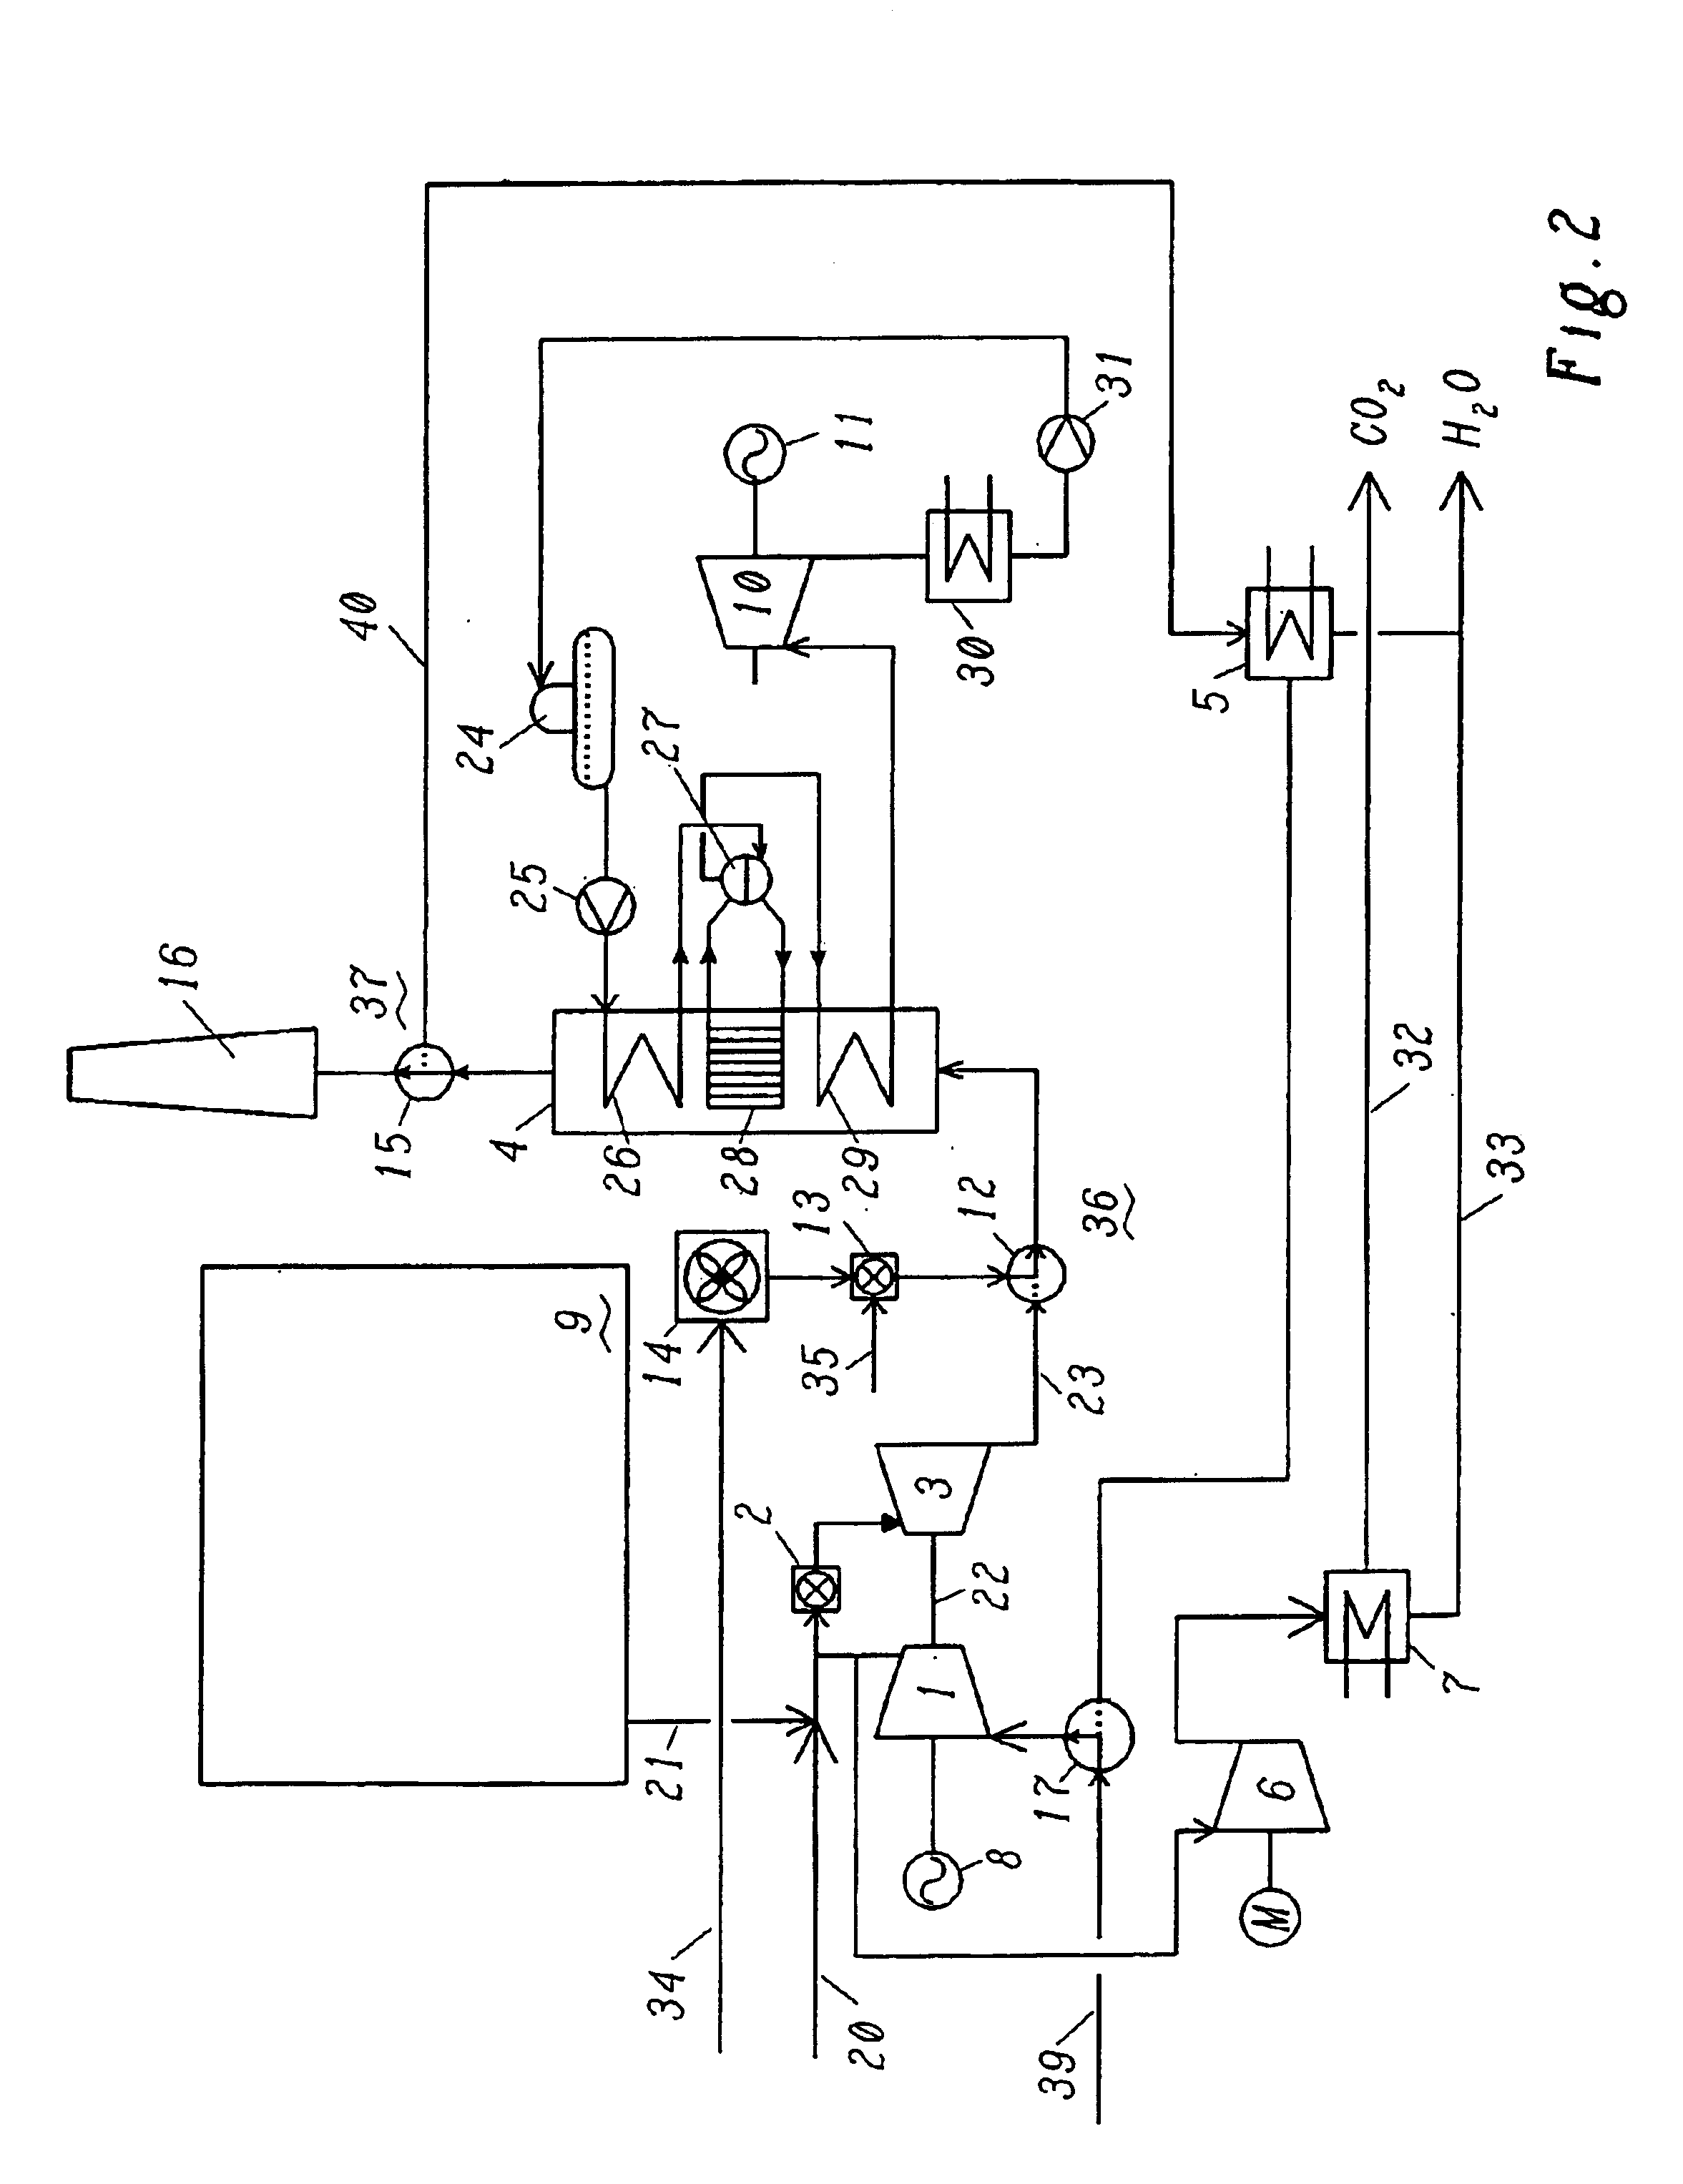 Methods and apparatus for starting up emission-free gas-turbine power stations